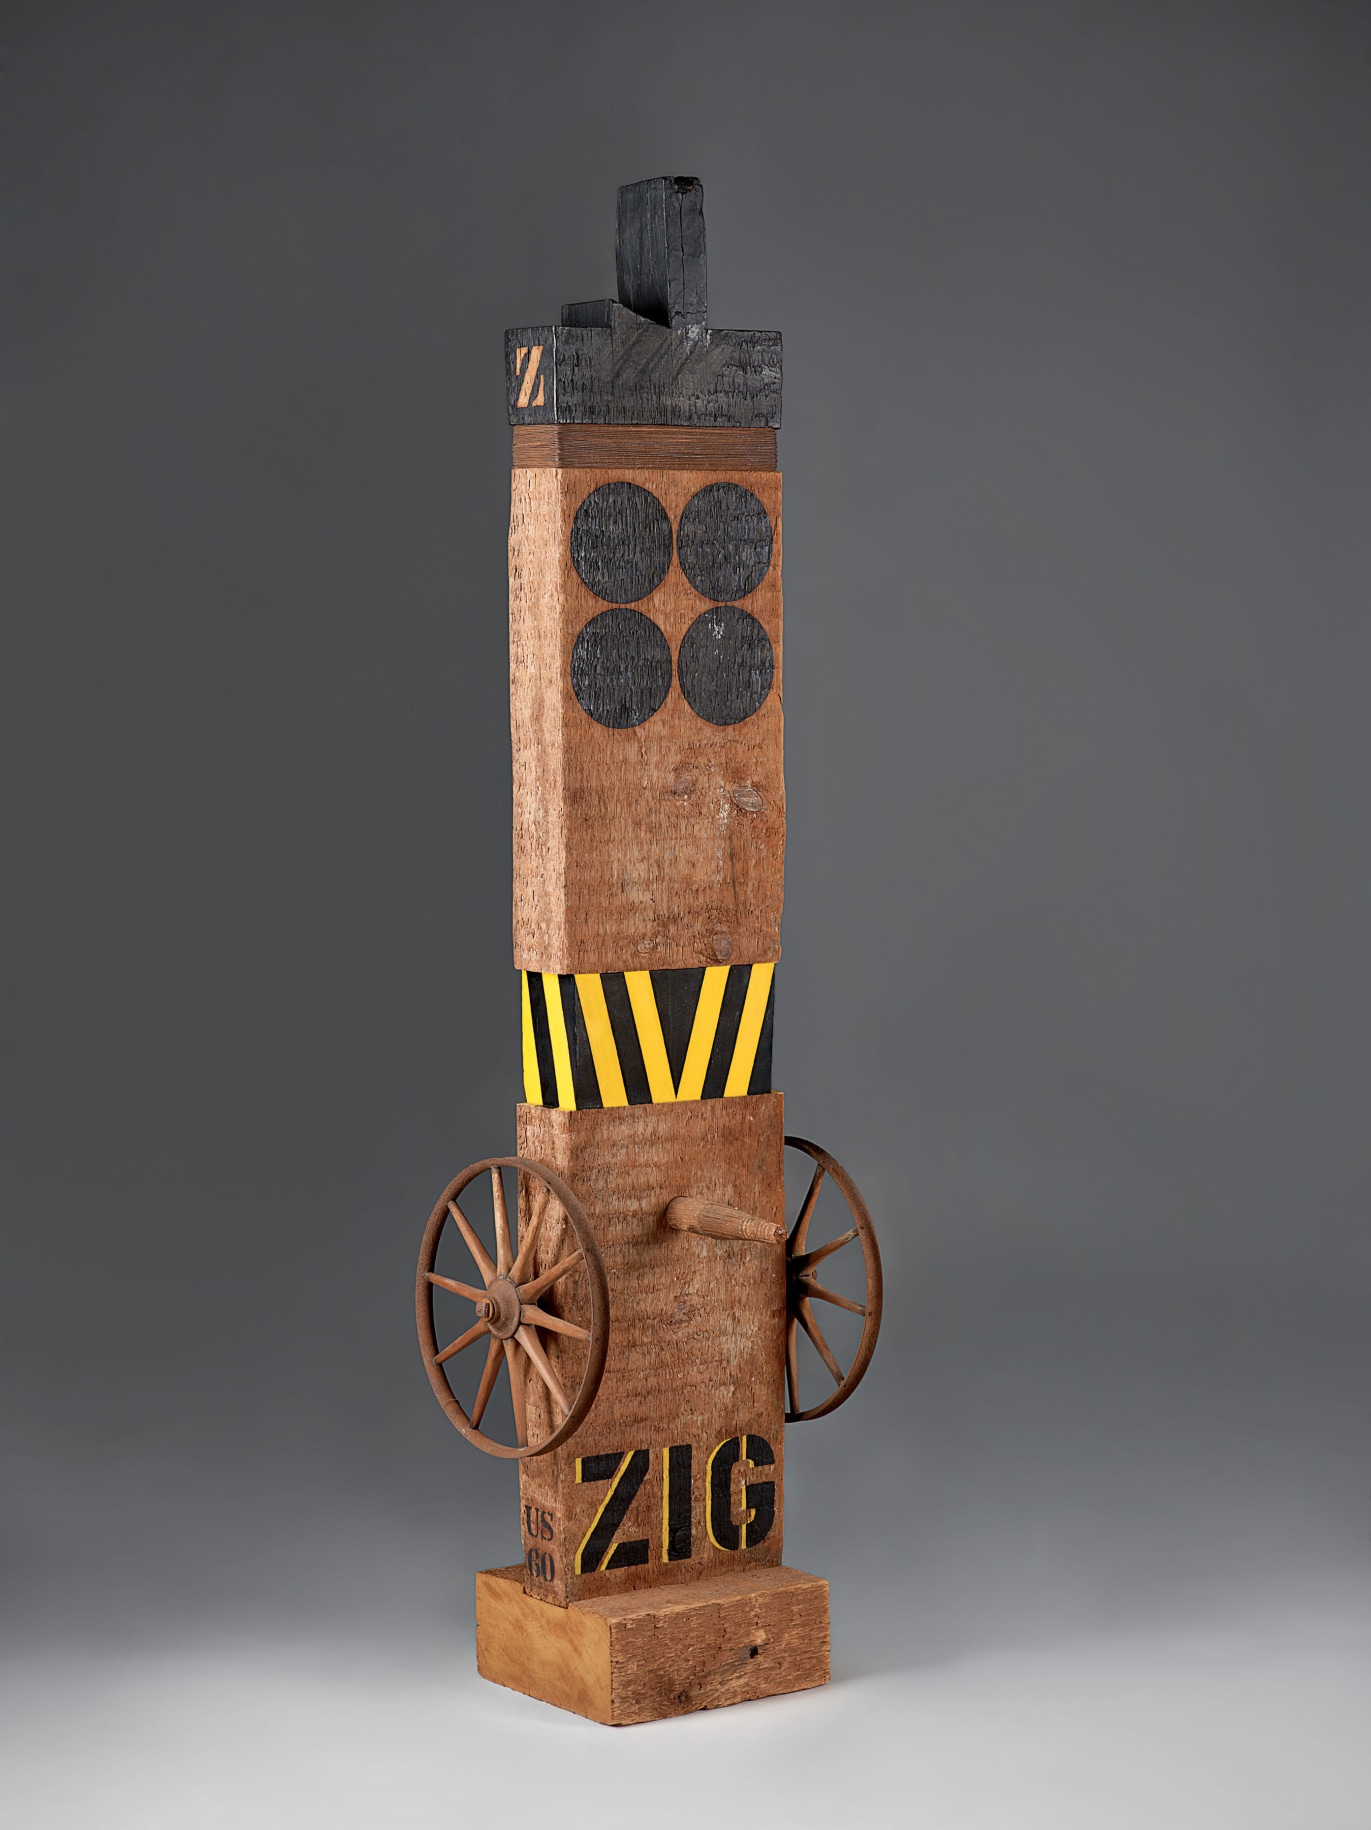 A 65 by 17 3/4 by 16 1/8 inch sculpture consisting of a wooden beam with a haunched tenon on a wooden base. The sculpture's title, &quot;Zig,&quot; is painted in black stenciled letters across the bottom of the work. Above the title, affixed on the left and right sides of the sculpture, are metal wheels. A wooden peg has been affixed to the front of the sculpture, in between the top rims of the wheels. A few inches above the peg is a band of yellow and black vertical stripes. The tenon and top of the sculpture have been painted black. Below this is a band of thin metal wires, and below that two rows of two black circles.